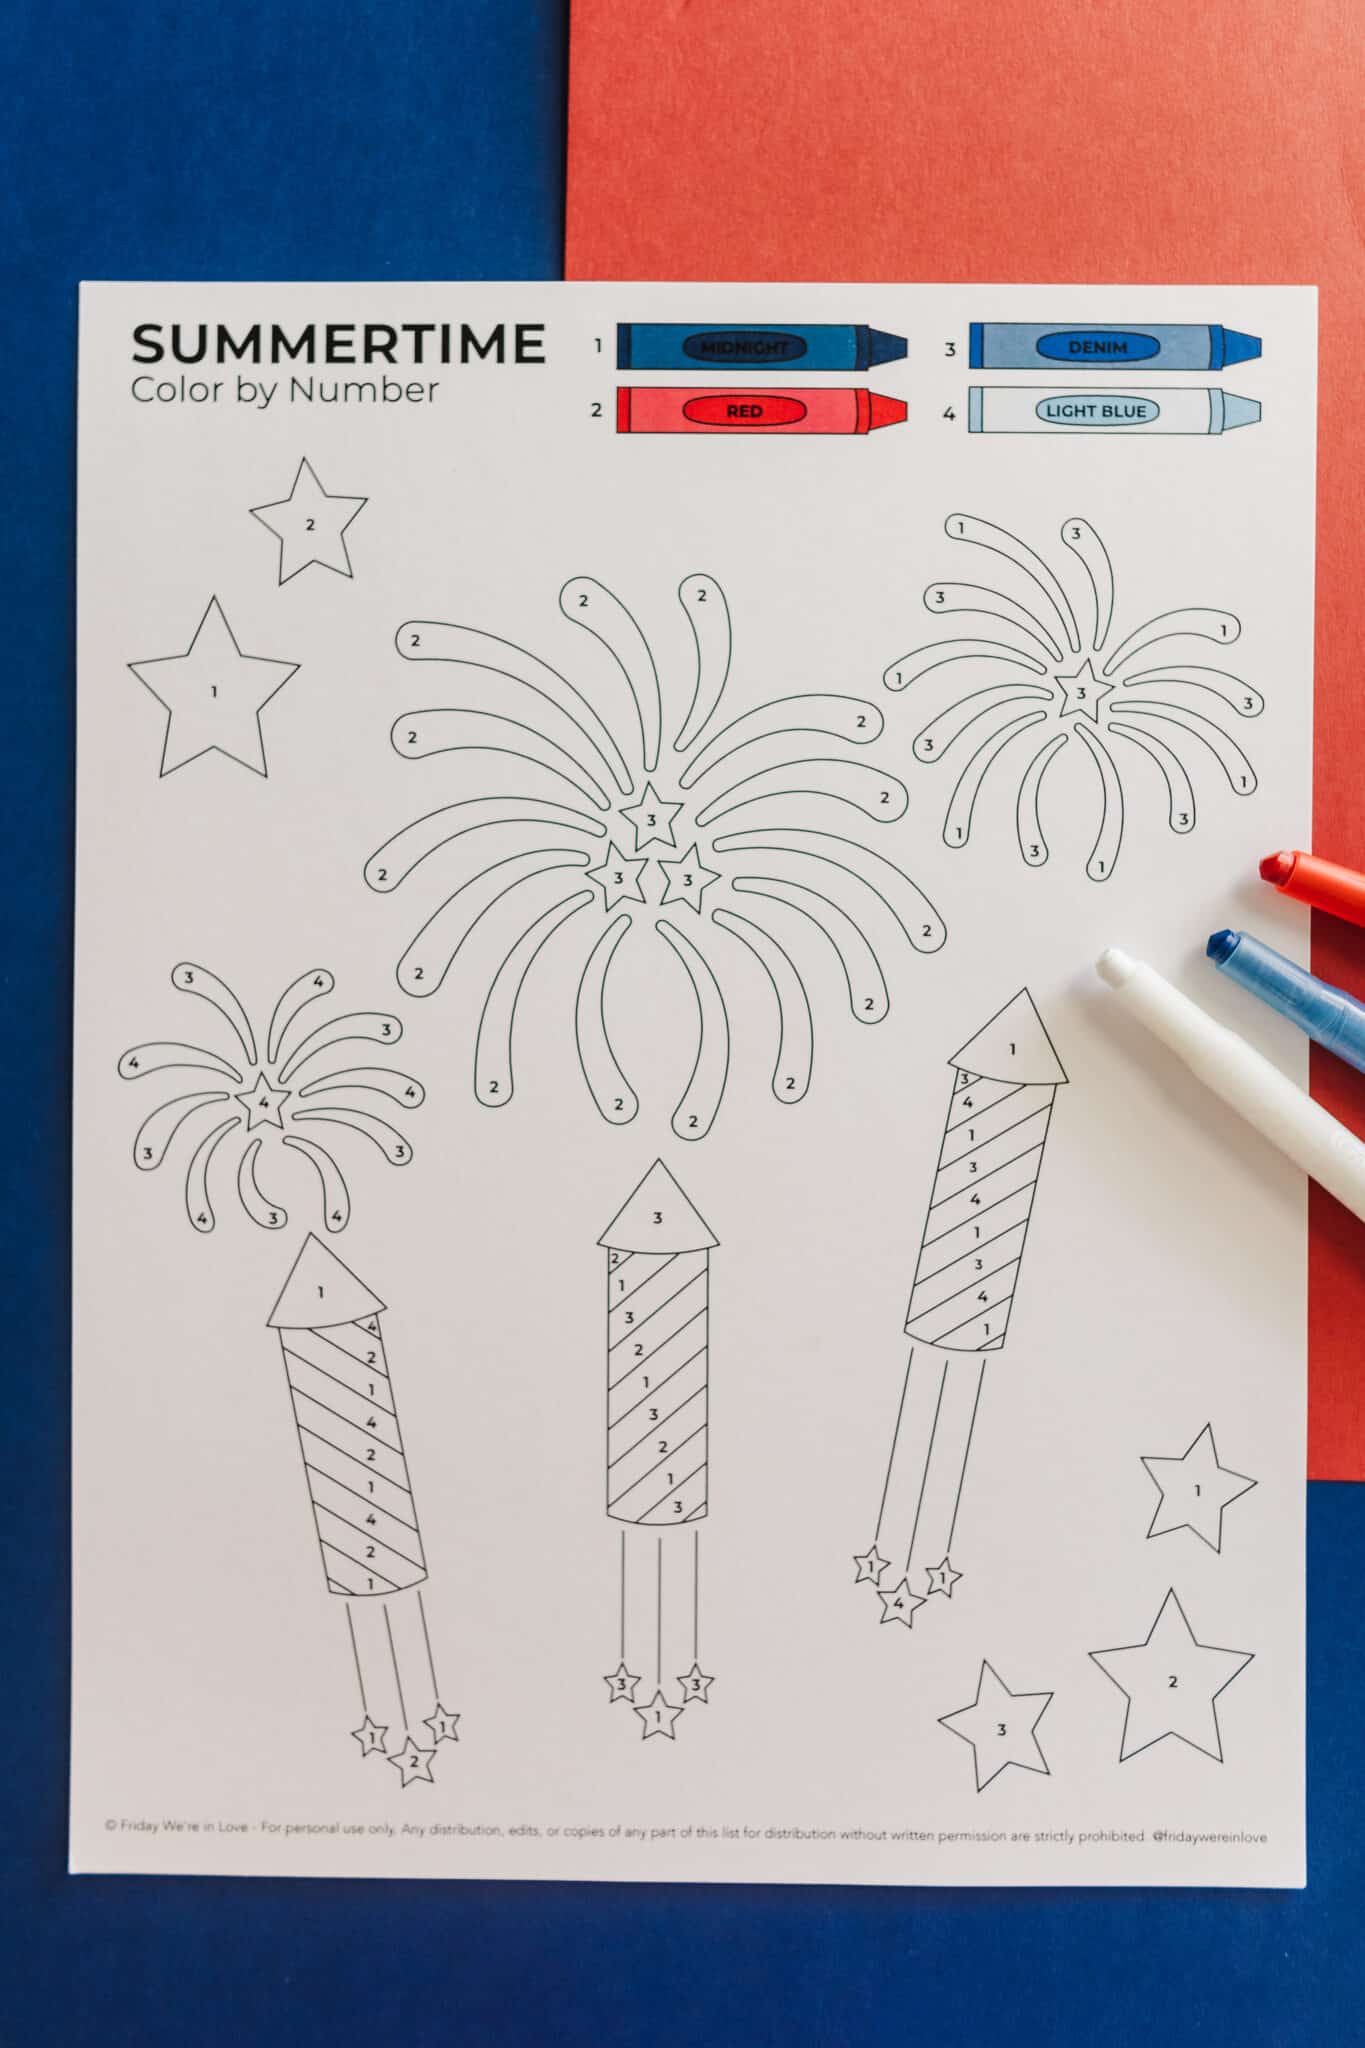 Fun 4th of July Color by Number Printable! 